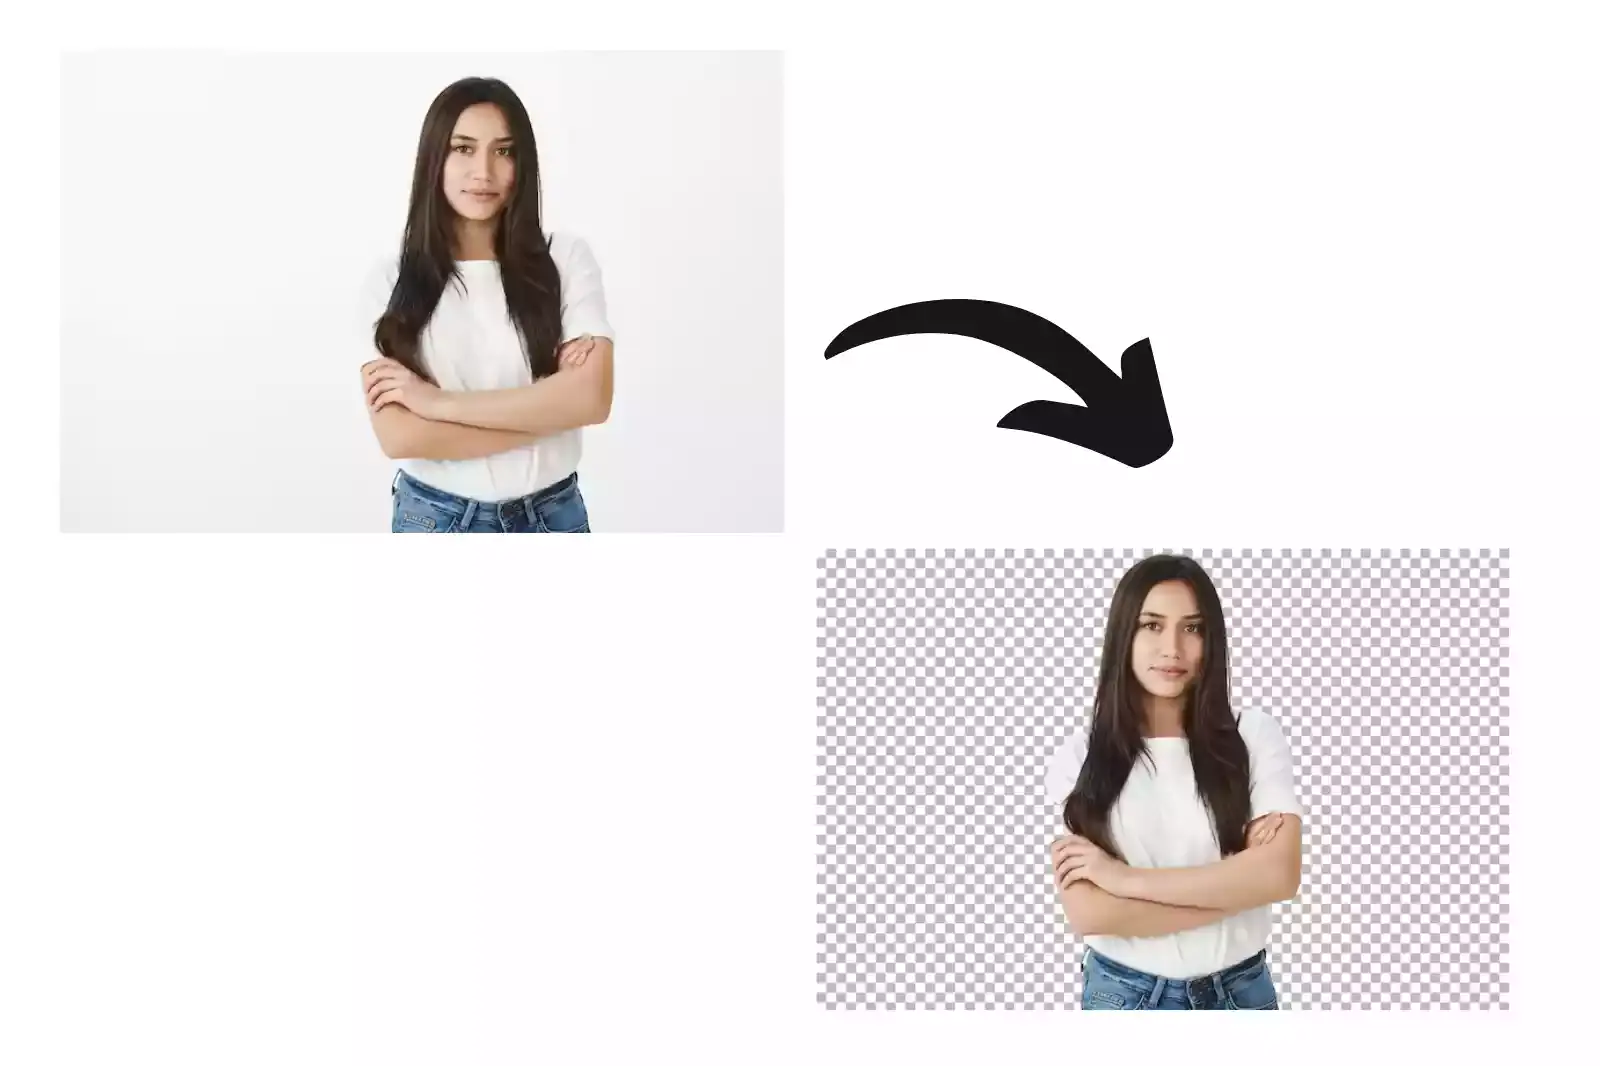 Converting your White Background to Tansparent Can have Many Benefits